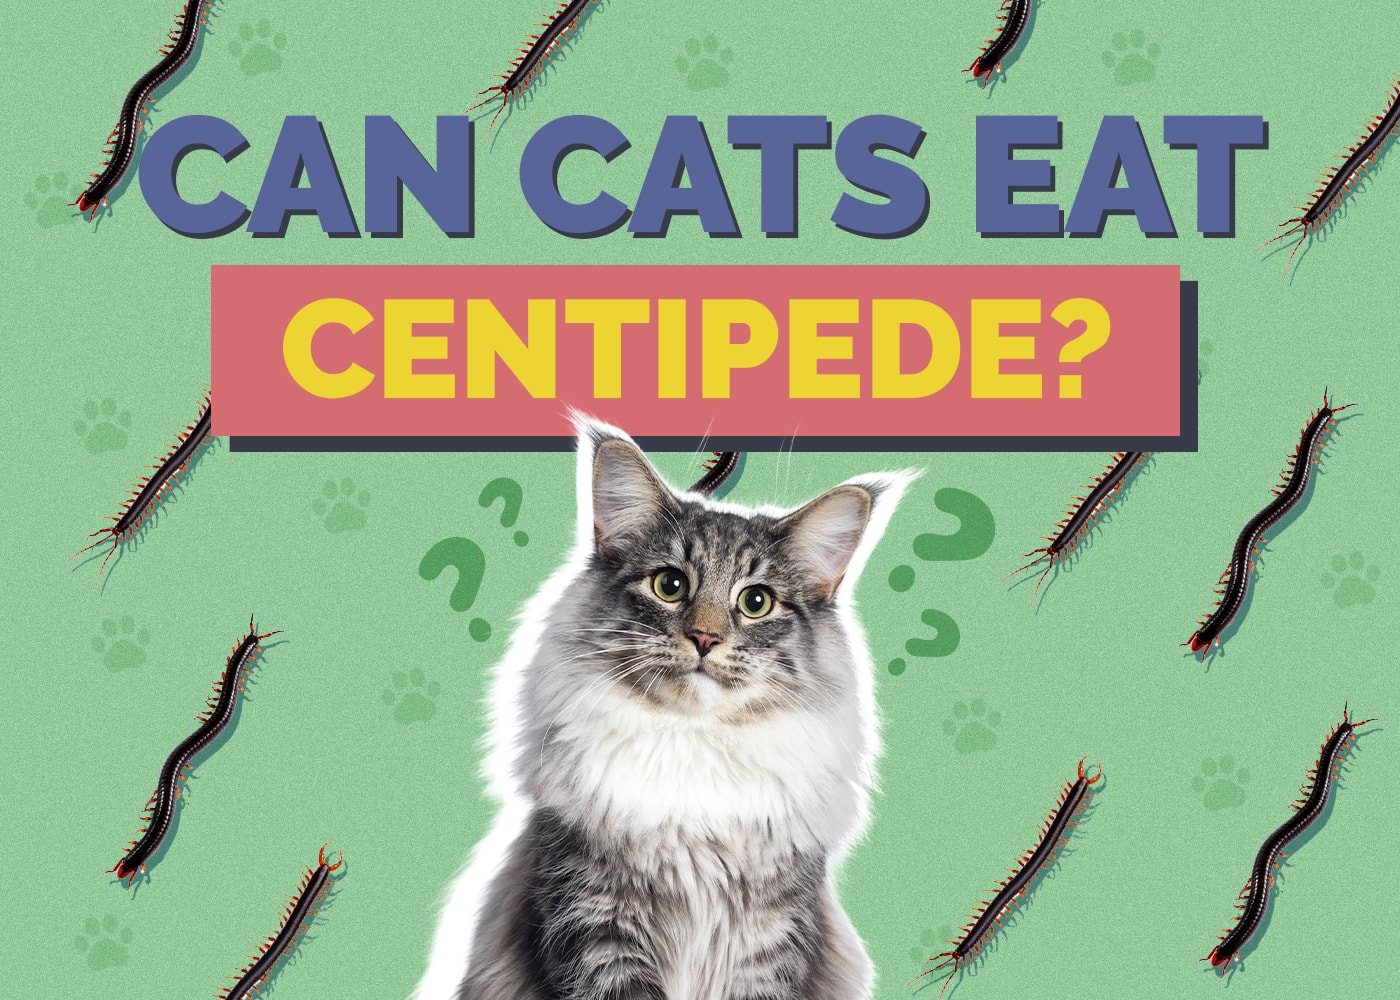 Can Cats Eat centipede